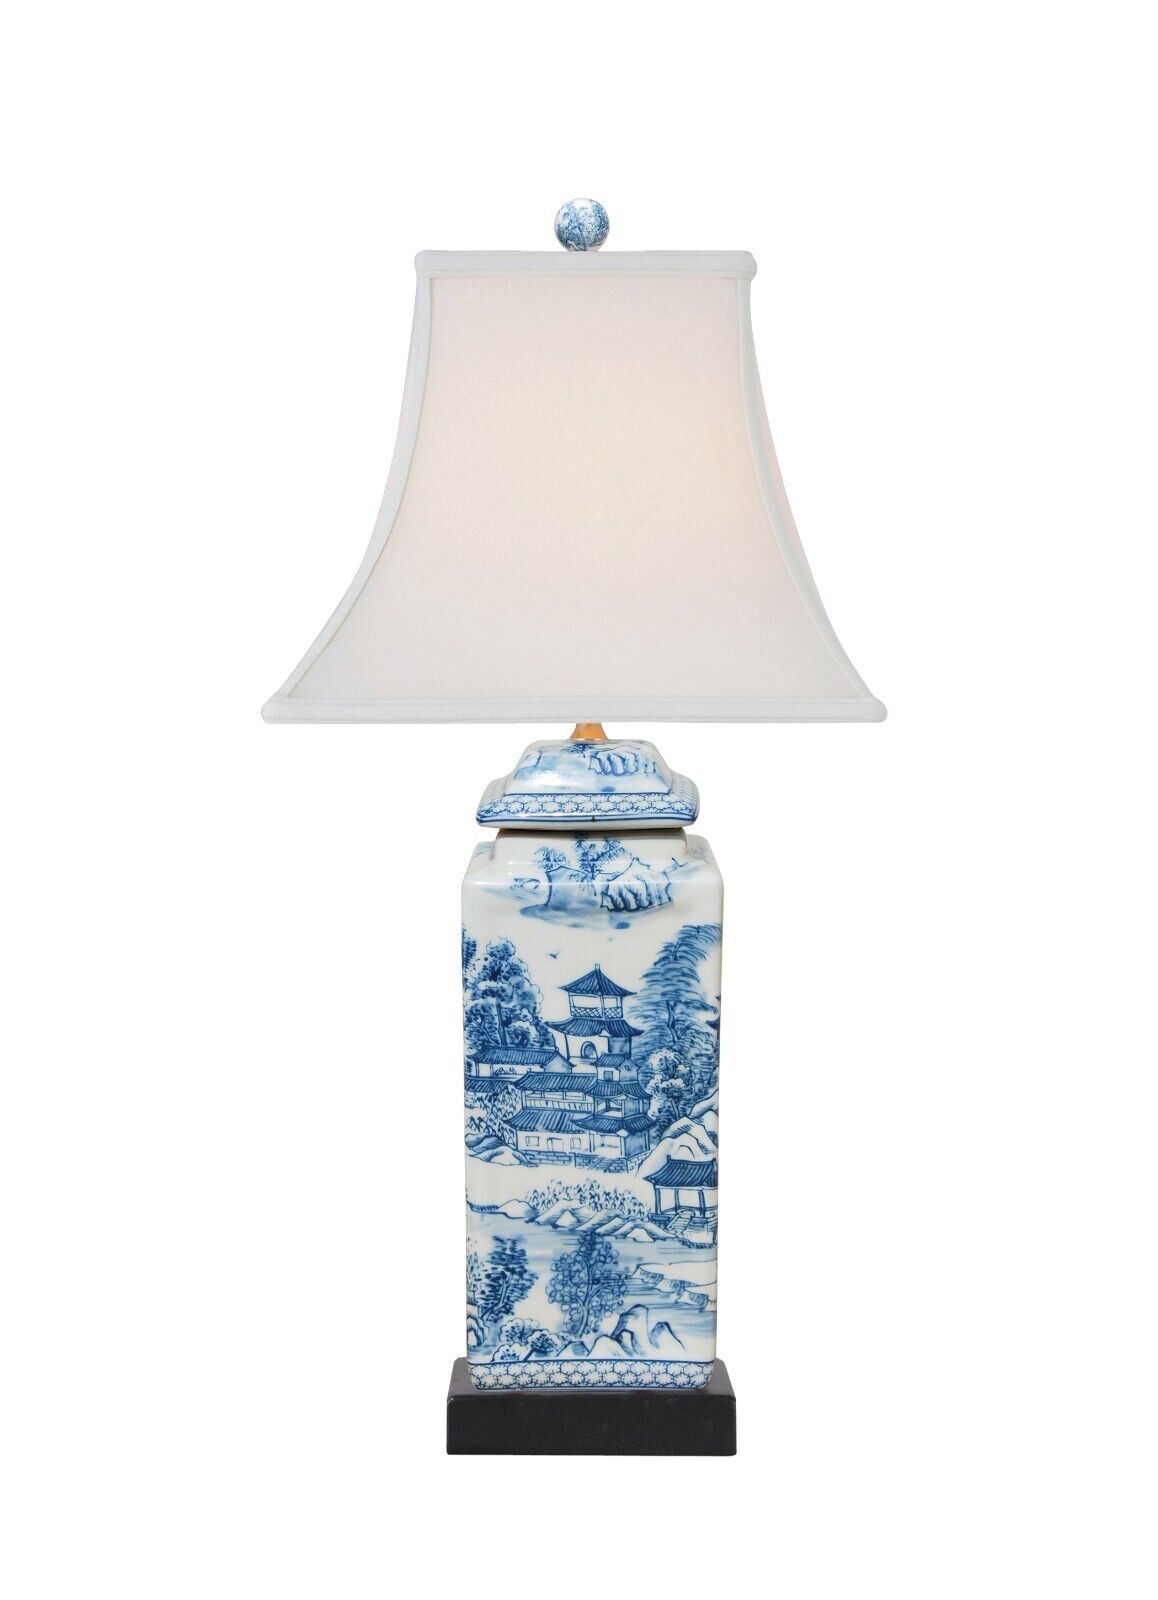 Elegant Blue and WHite Chinoiserie Square Jar Table Lamp